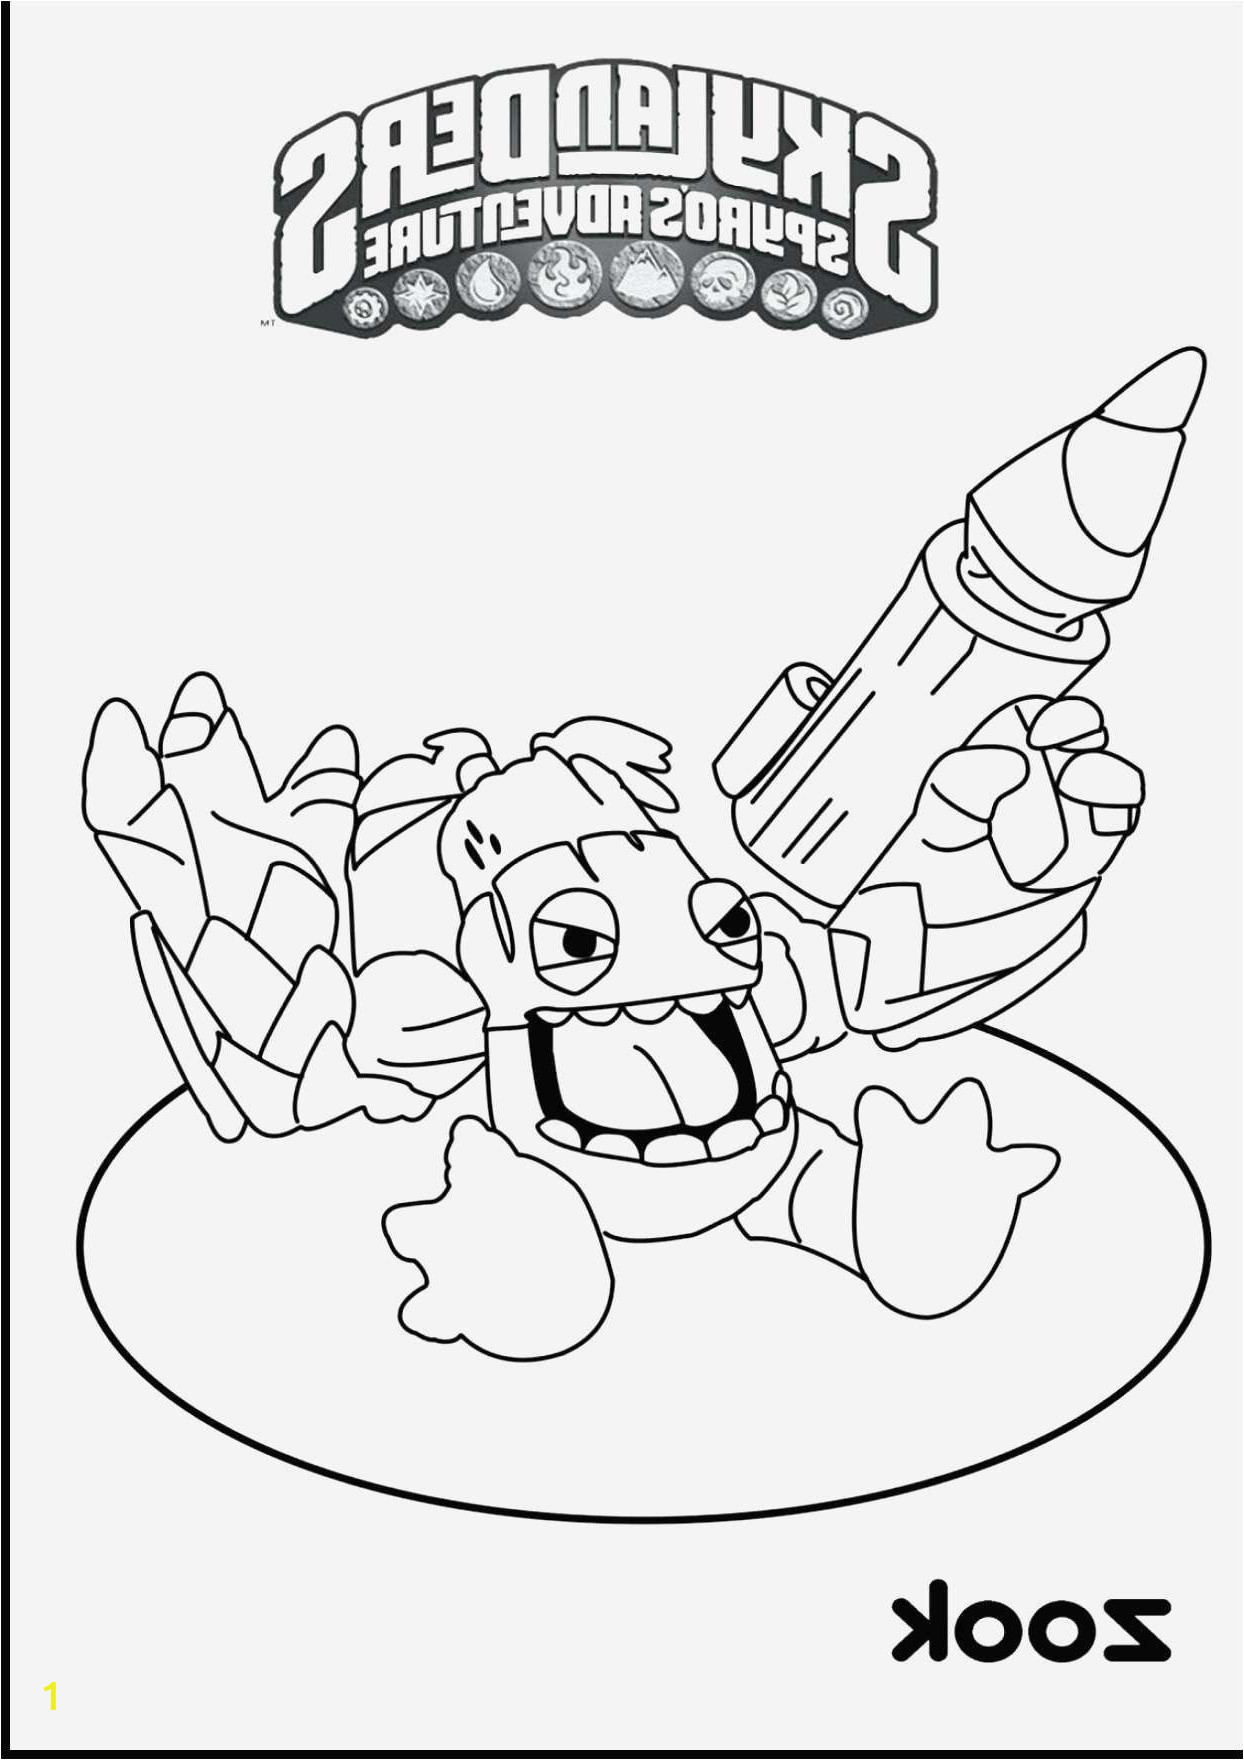 Printable Farm Coloring Pages 20 Awesome Collection Farm Animals Coloring Picture